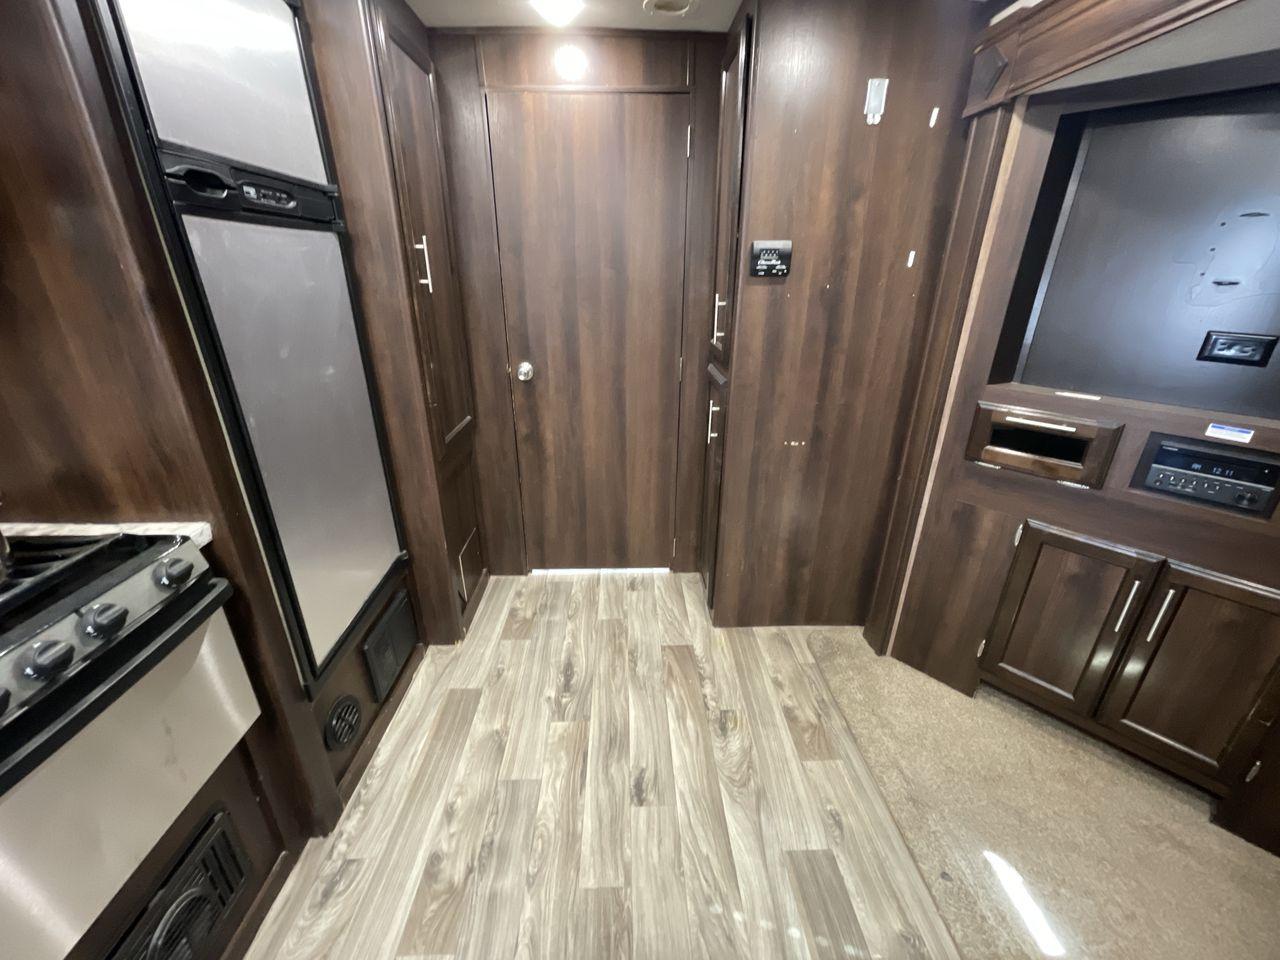 2018 WHITE JAYCO JAY FLIGHT 23MRB (1UJBJ0BN5J1) , Length: 28.17 ft | Dry Weight: 5,560 lbs. | Gross Weight: 7,250 lbs. | Slides: 1 transmission, located at 4319 N Main St, Cleburne, TX, 76033, (817) 678-5133, 32.385960, -97.391212 - The 2018 Jayco Jay Flight 23MRB is a travel trailer that encapsulates both compactness and luxury for unparalleled camping experiences. Spanning 28 feet in length, this model boasts a thoughtfully arranged interior featuring a single slide-out, seamlessly amplifying the living space. The Jay Flight - Photo #13